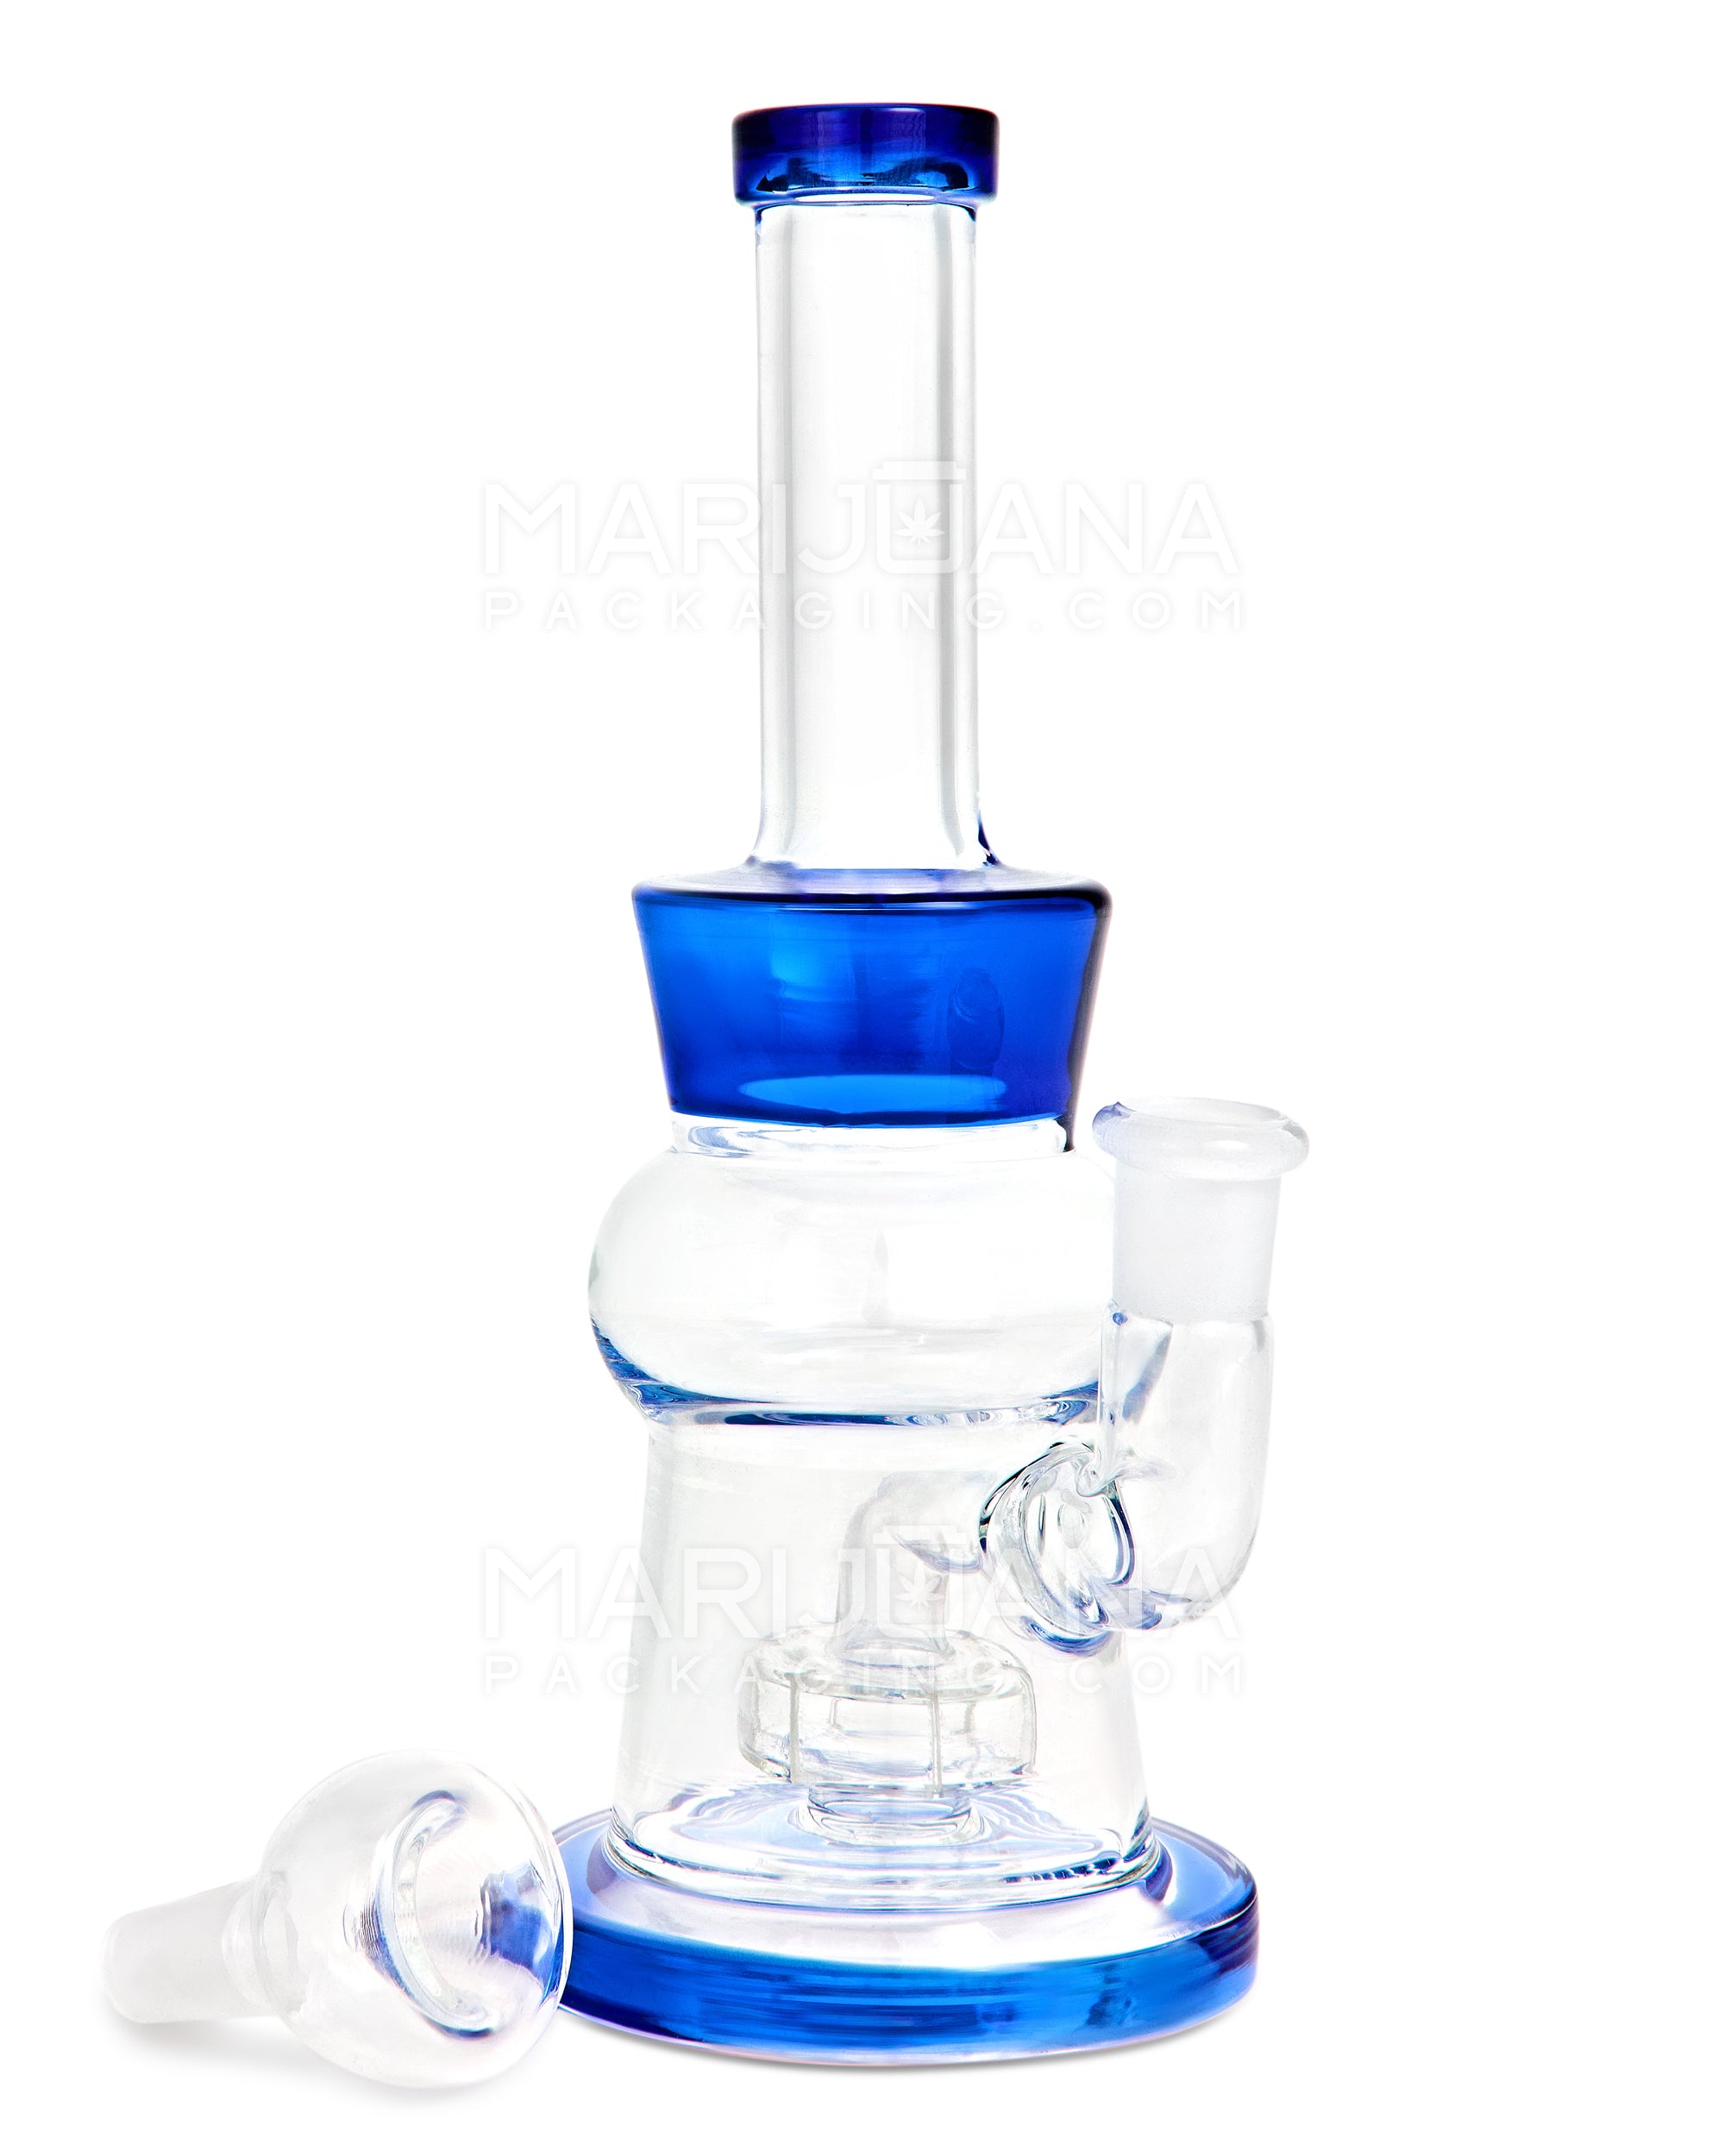 Straight Neck Showerhead Perc Glass Blunted Cone Water Pipe w/ Thick Base | 8in Tall - 14mm Bowl - Blue - 2